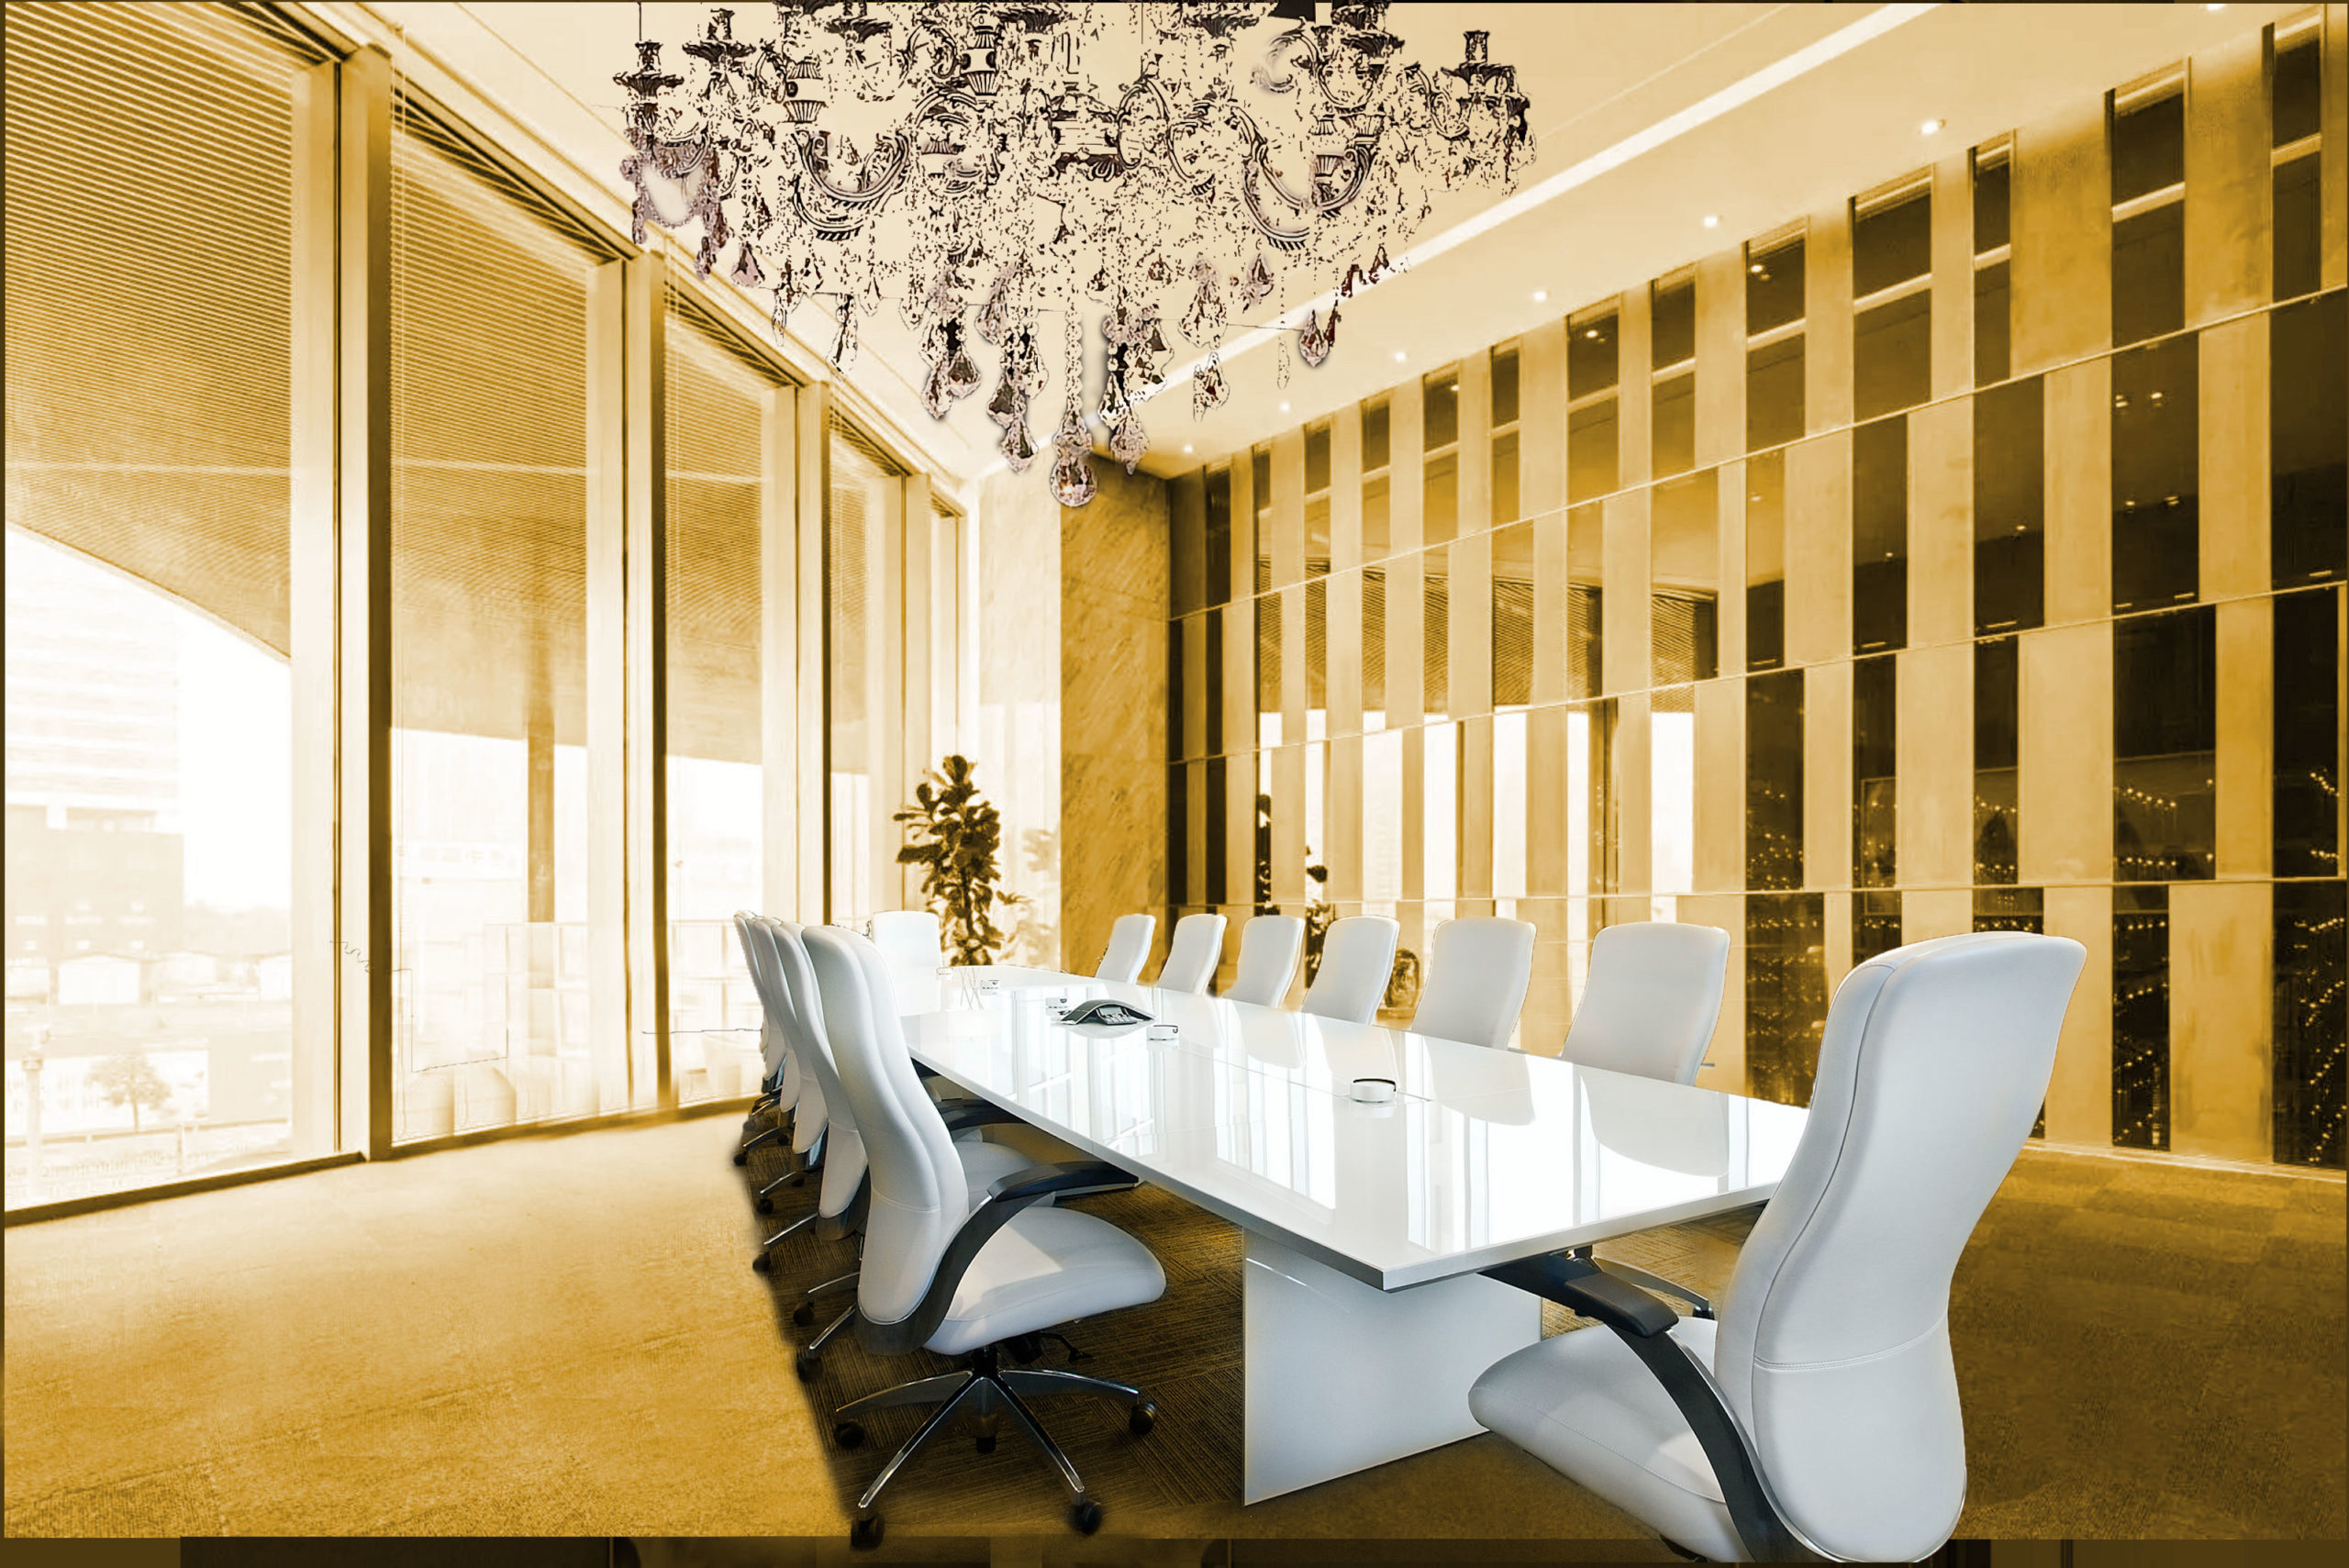 When you deserve an upgrade to true boardroom excellence consider the White Glass Conference Table to kick start your modern renovation